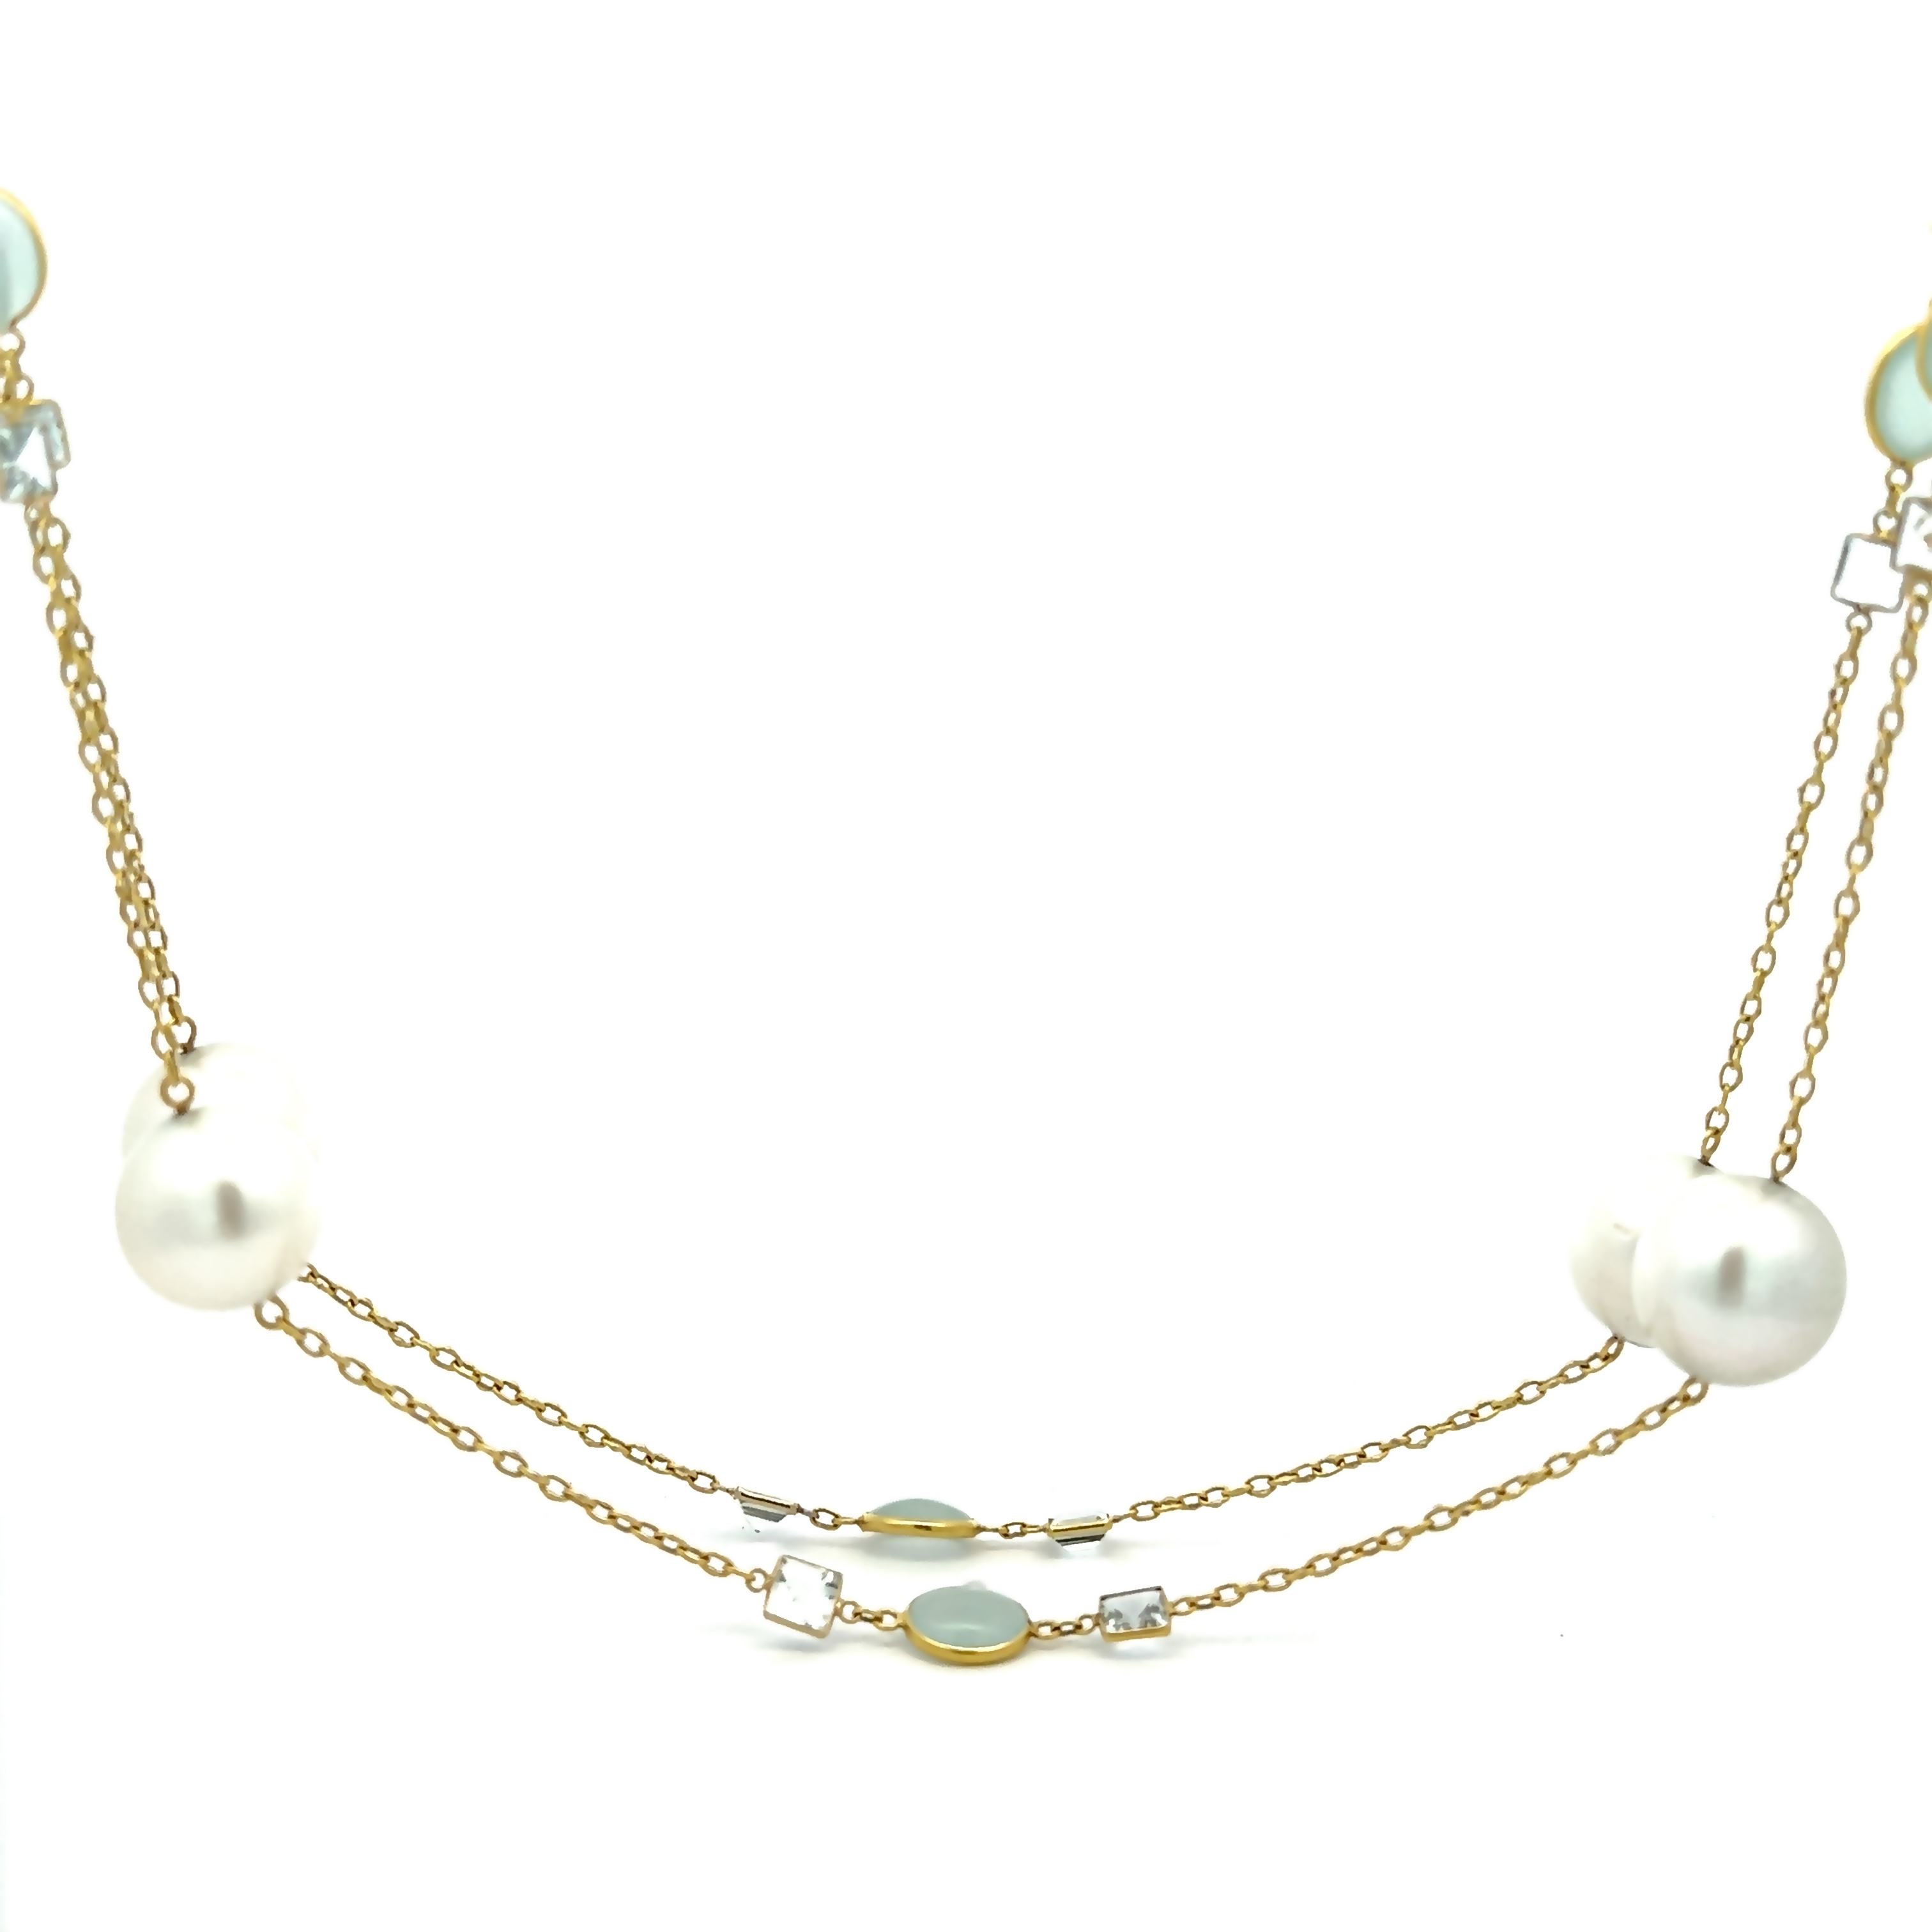 18 Karat yellow gold tin cup necklace with 7=12.00-13.00mm South Sea Pearls  8= Cabochon Aquamarines and 16= square cut White Topazs